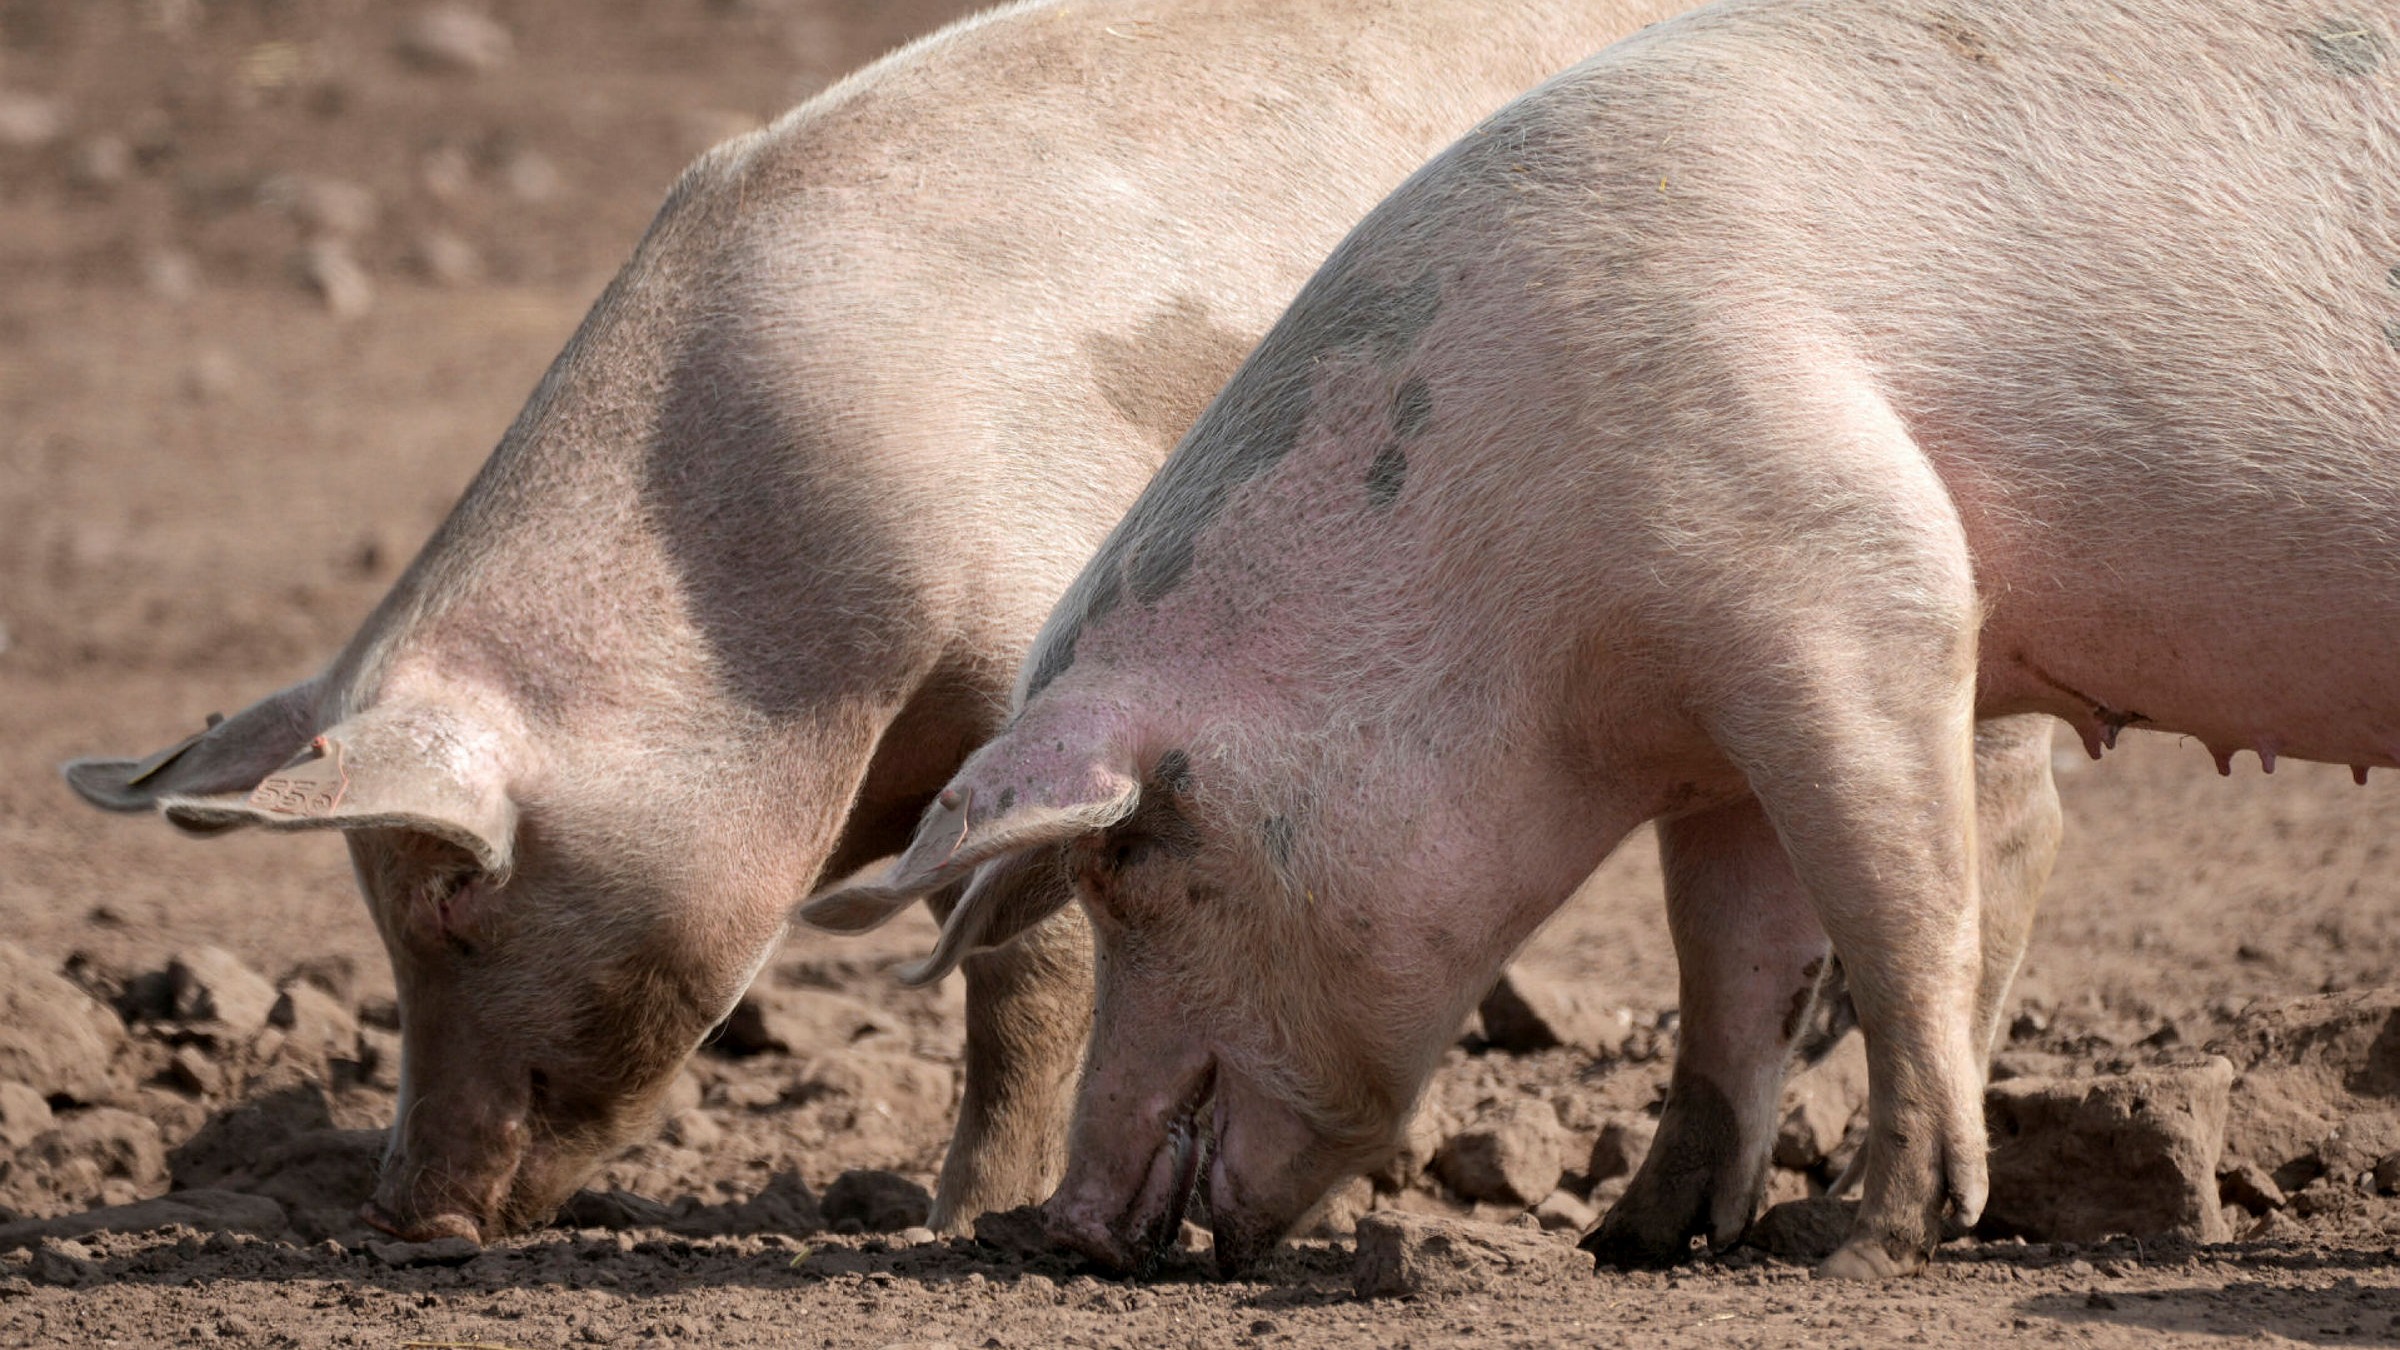 UK pig farms cull healthy animals amid labour shortage | Financial Times